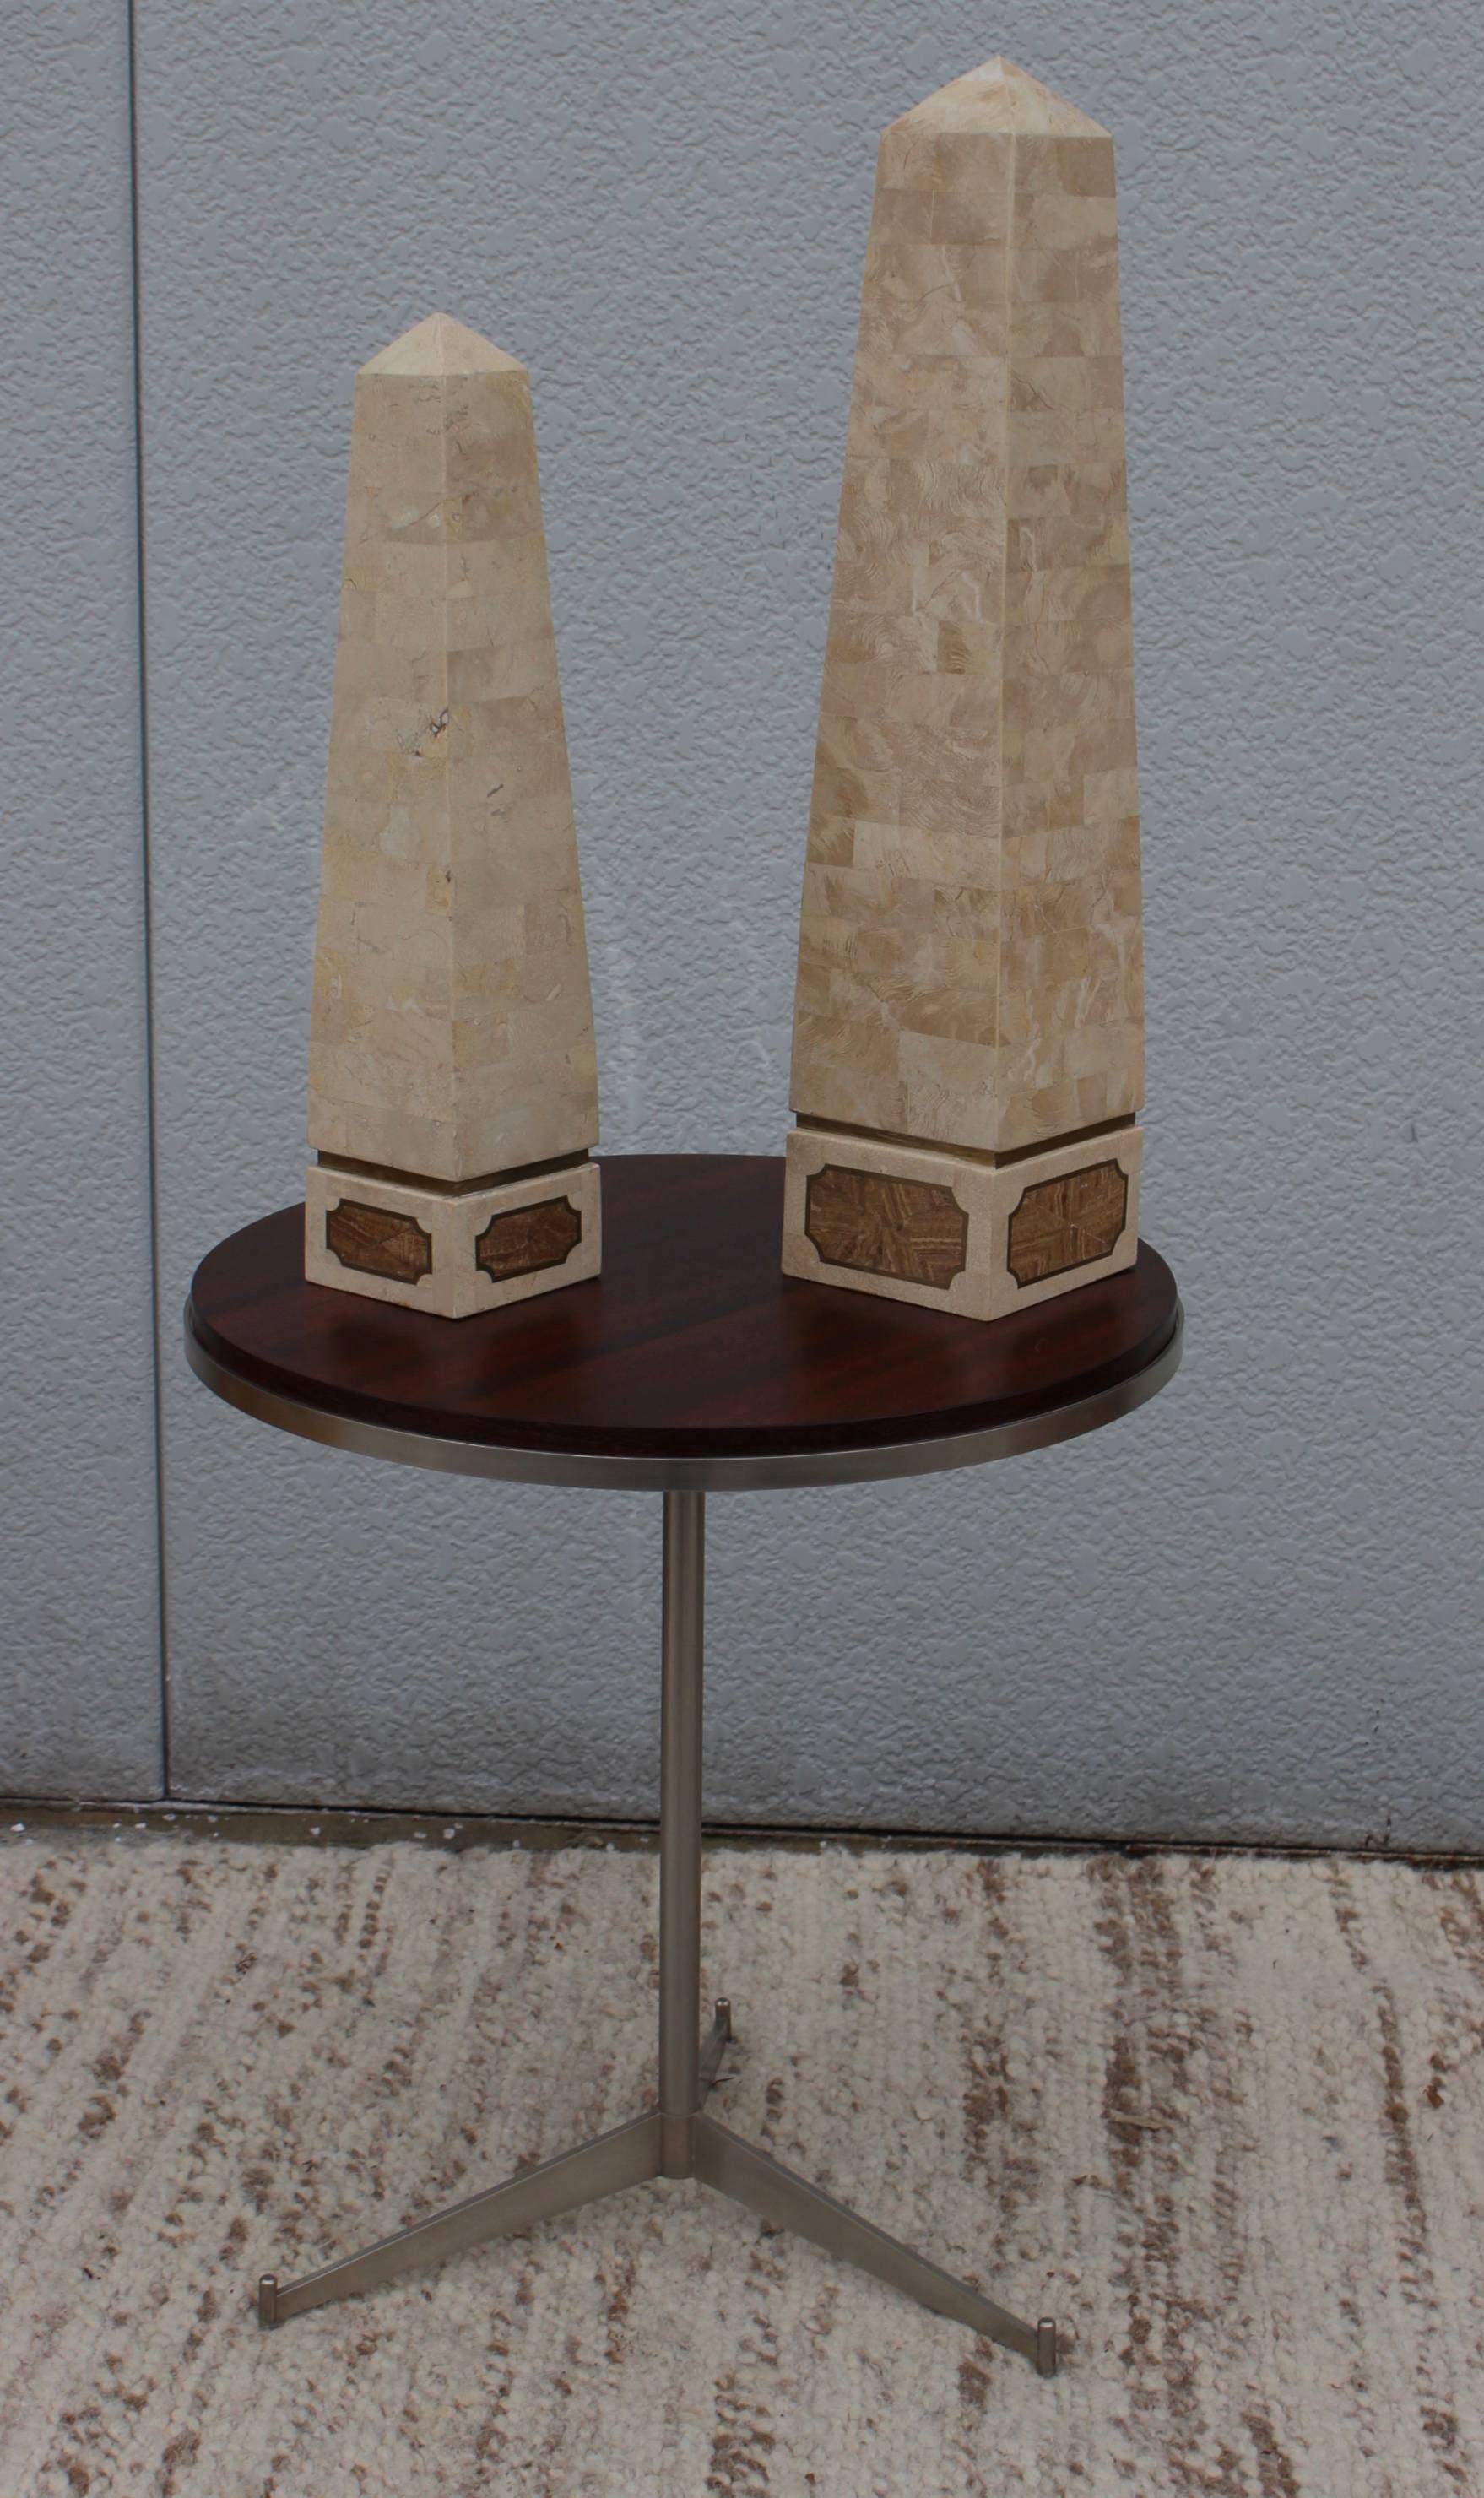 1970s modern Maitland Smith Style tessellated stone with brass inlay detail obelisks, in vintage original condition with minor wear and pagtina due to age and use.

Smaller obelisk height 19.25'' diameter 4.25''.